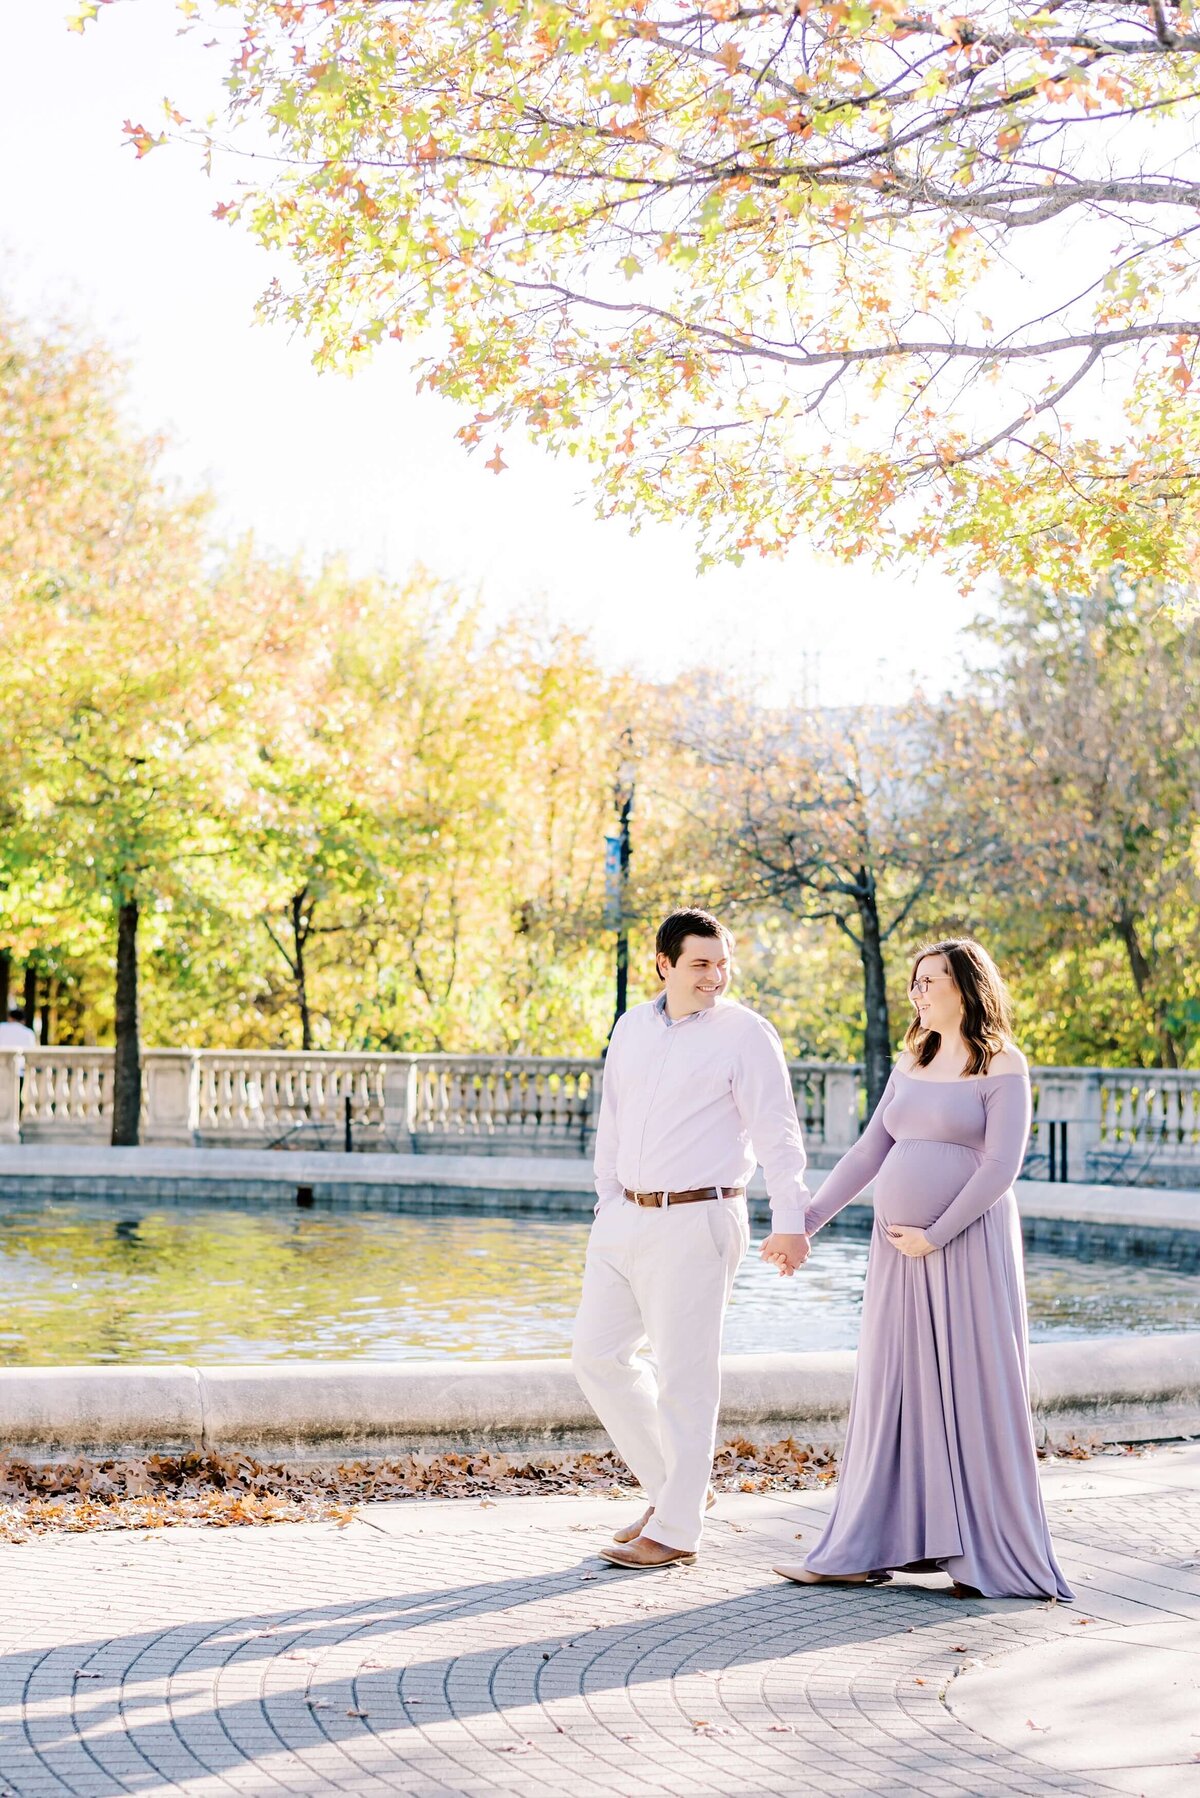 An expecting couple hold hands while taking a stroll through Charlotte's Midtown Park during the fall.